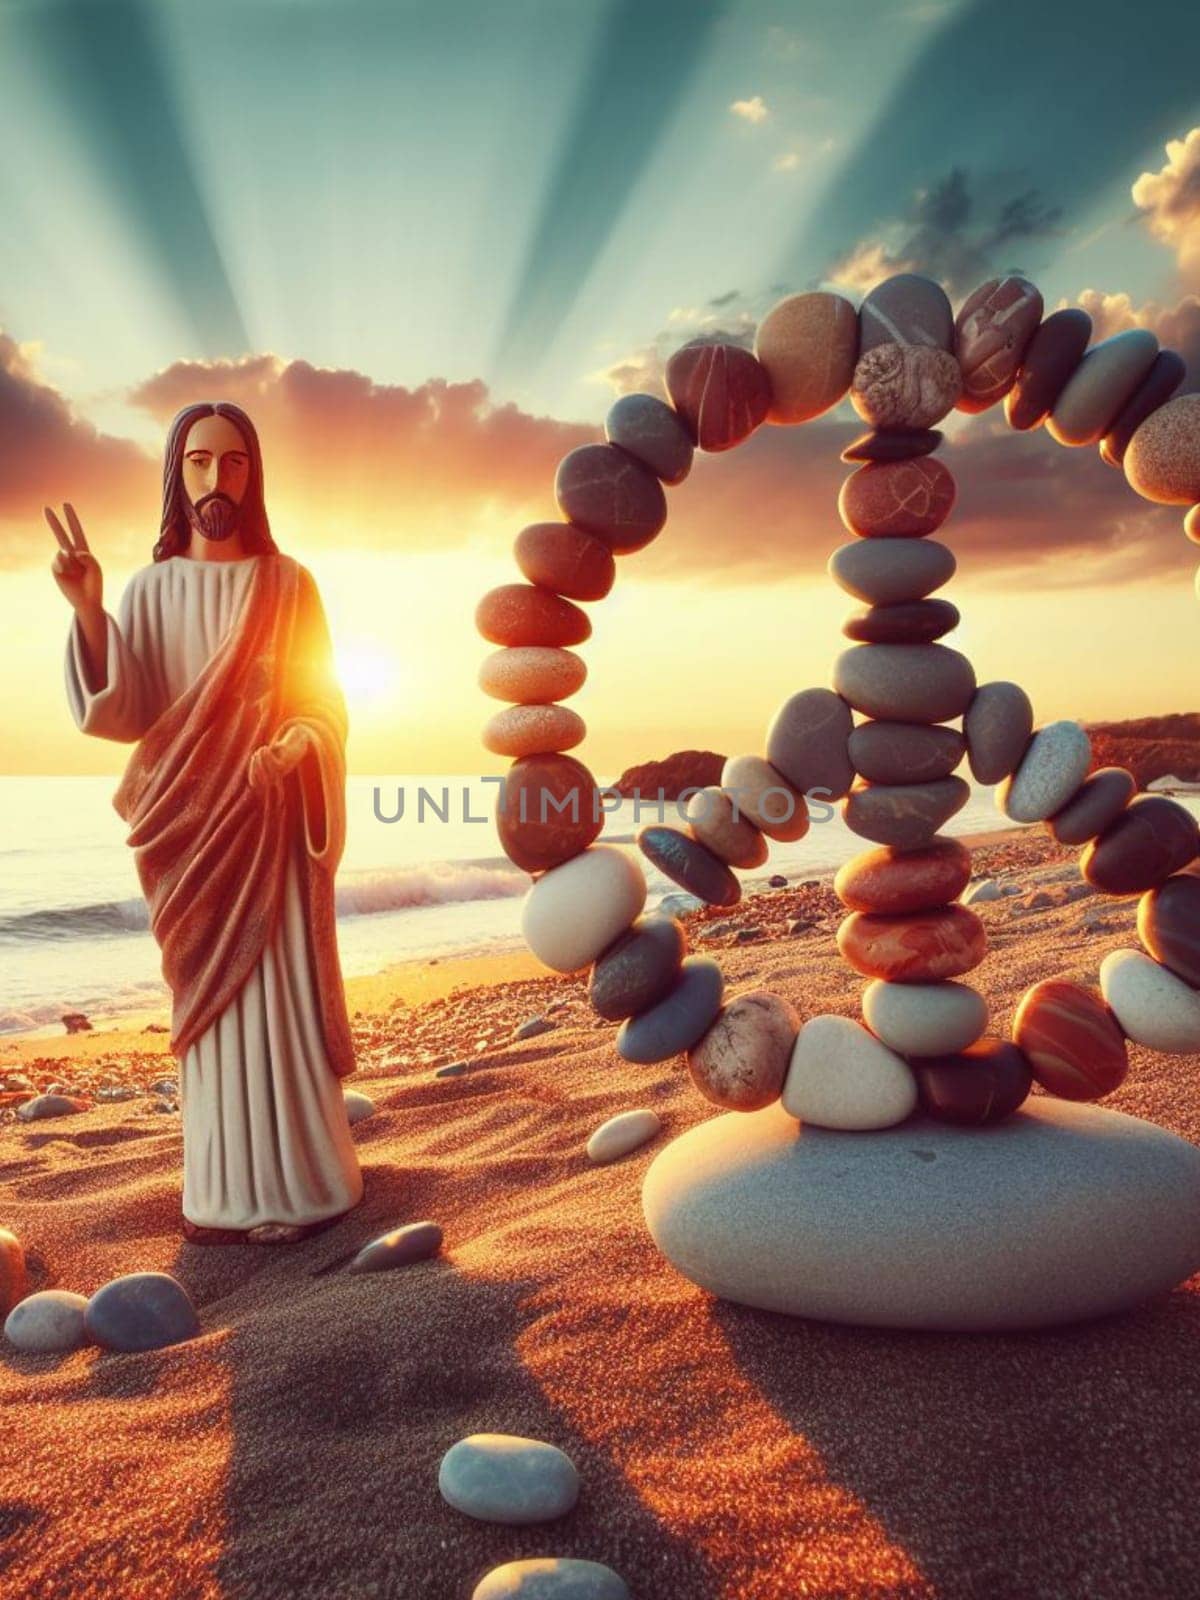 Sculpture of Jesus Christ made of pebbles at the beacj at sunset, asking for peace stop war concept by verbano